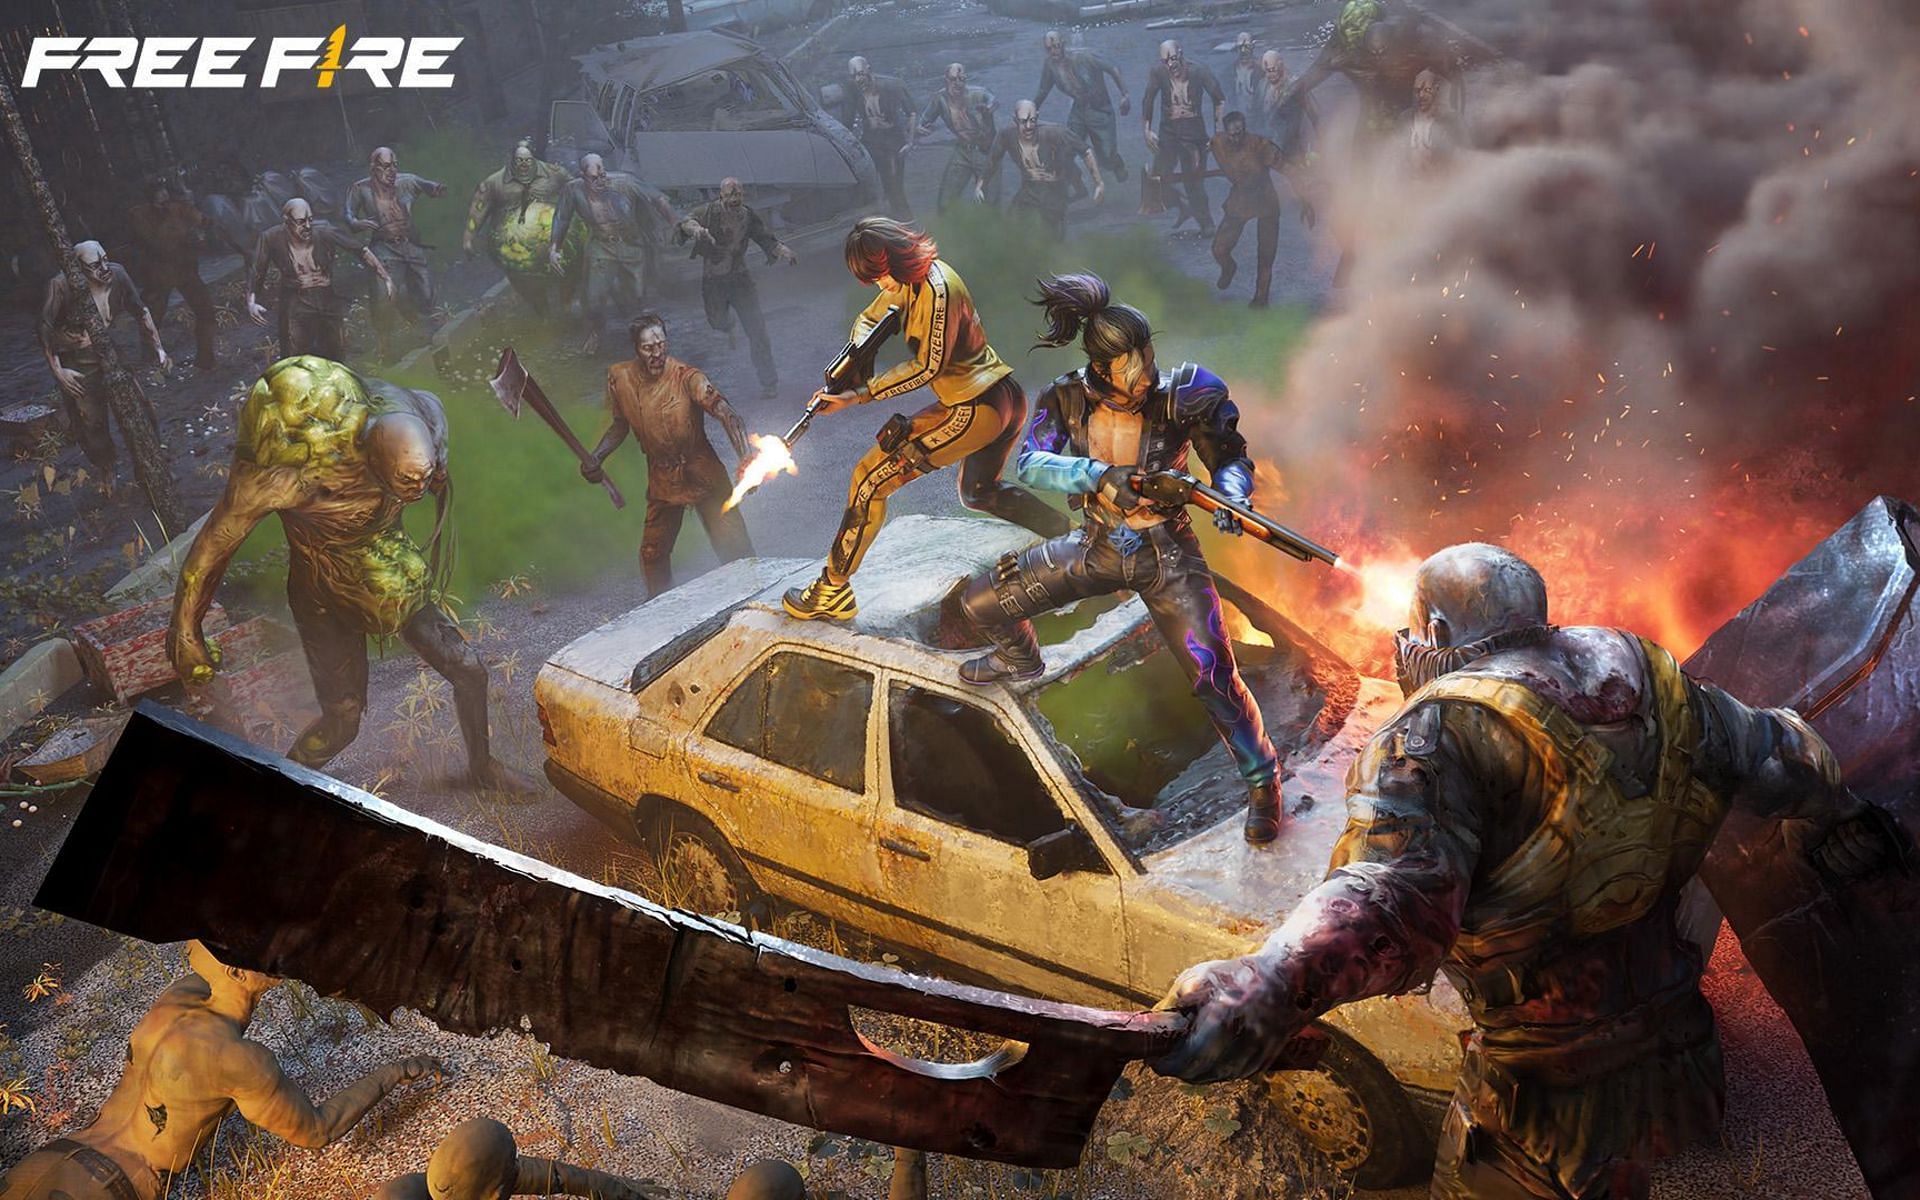 Free Fire may not gett unbanned in India anytime soon (Image via Garena)